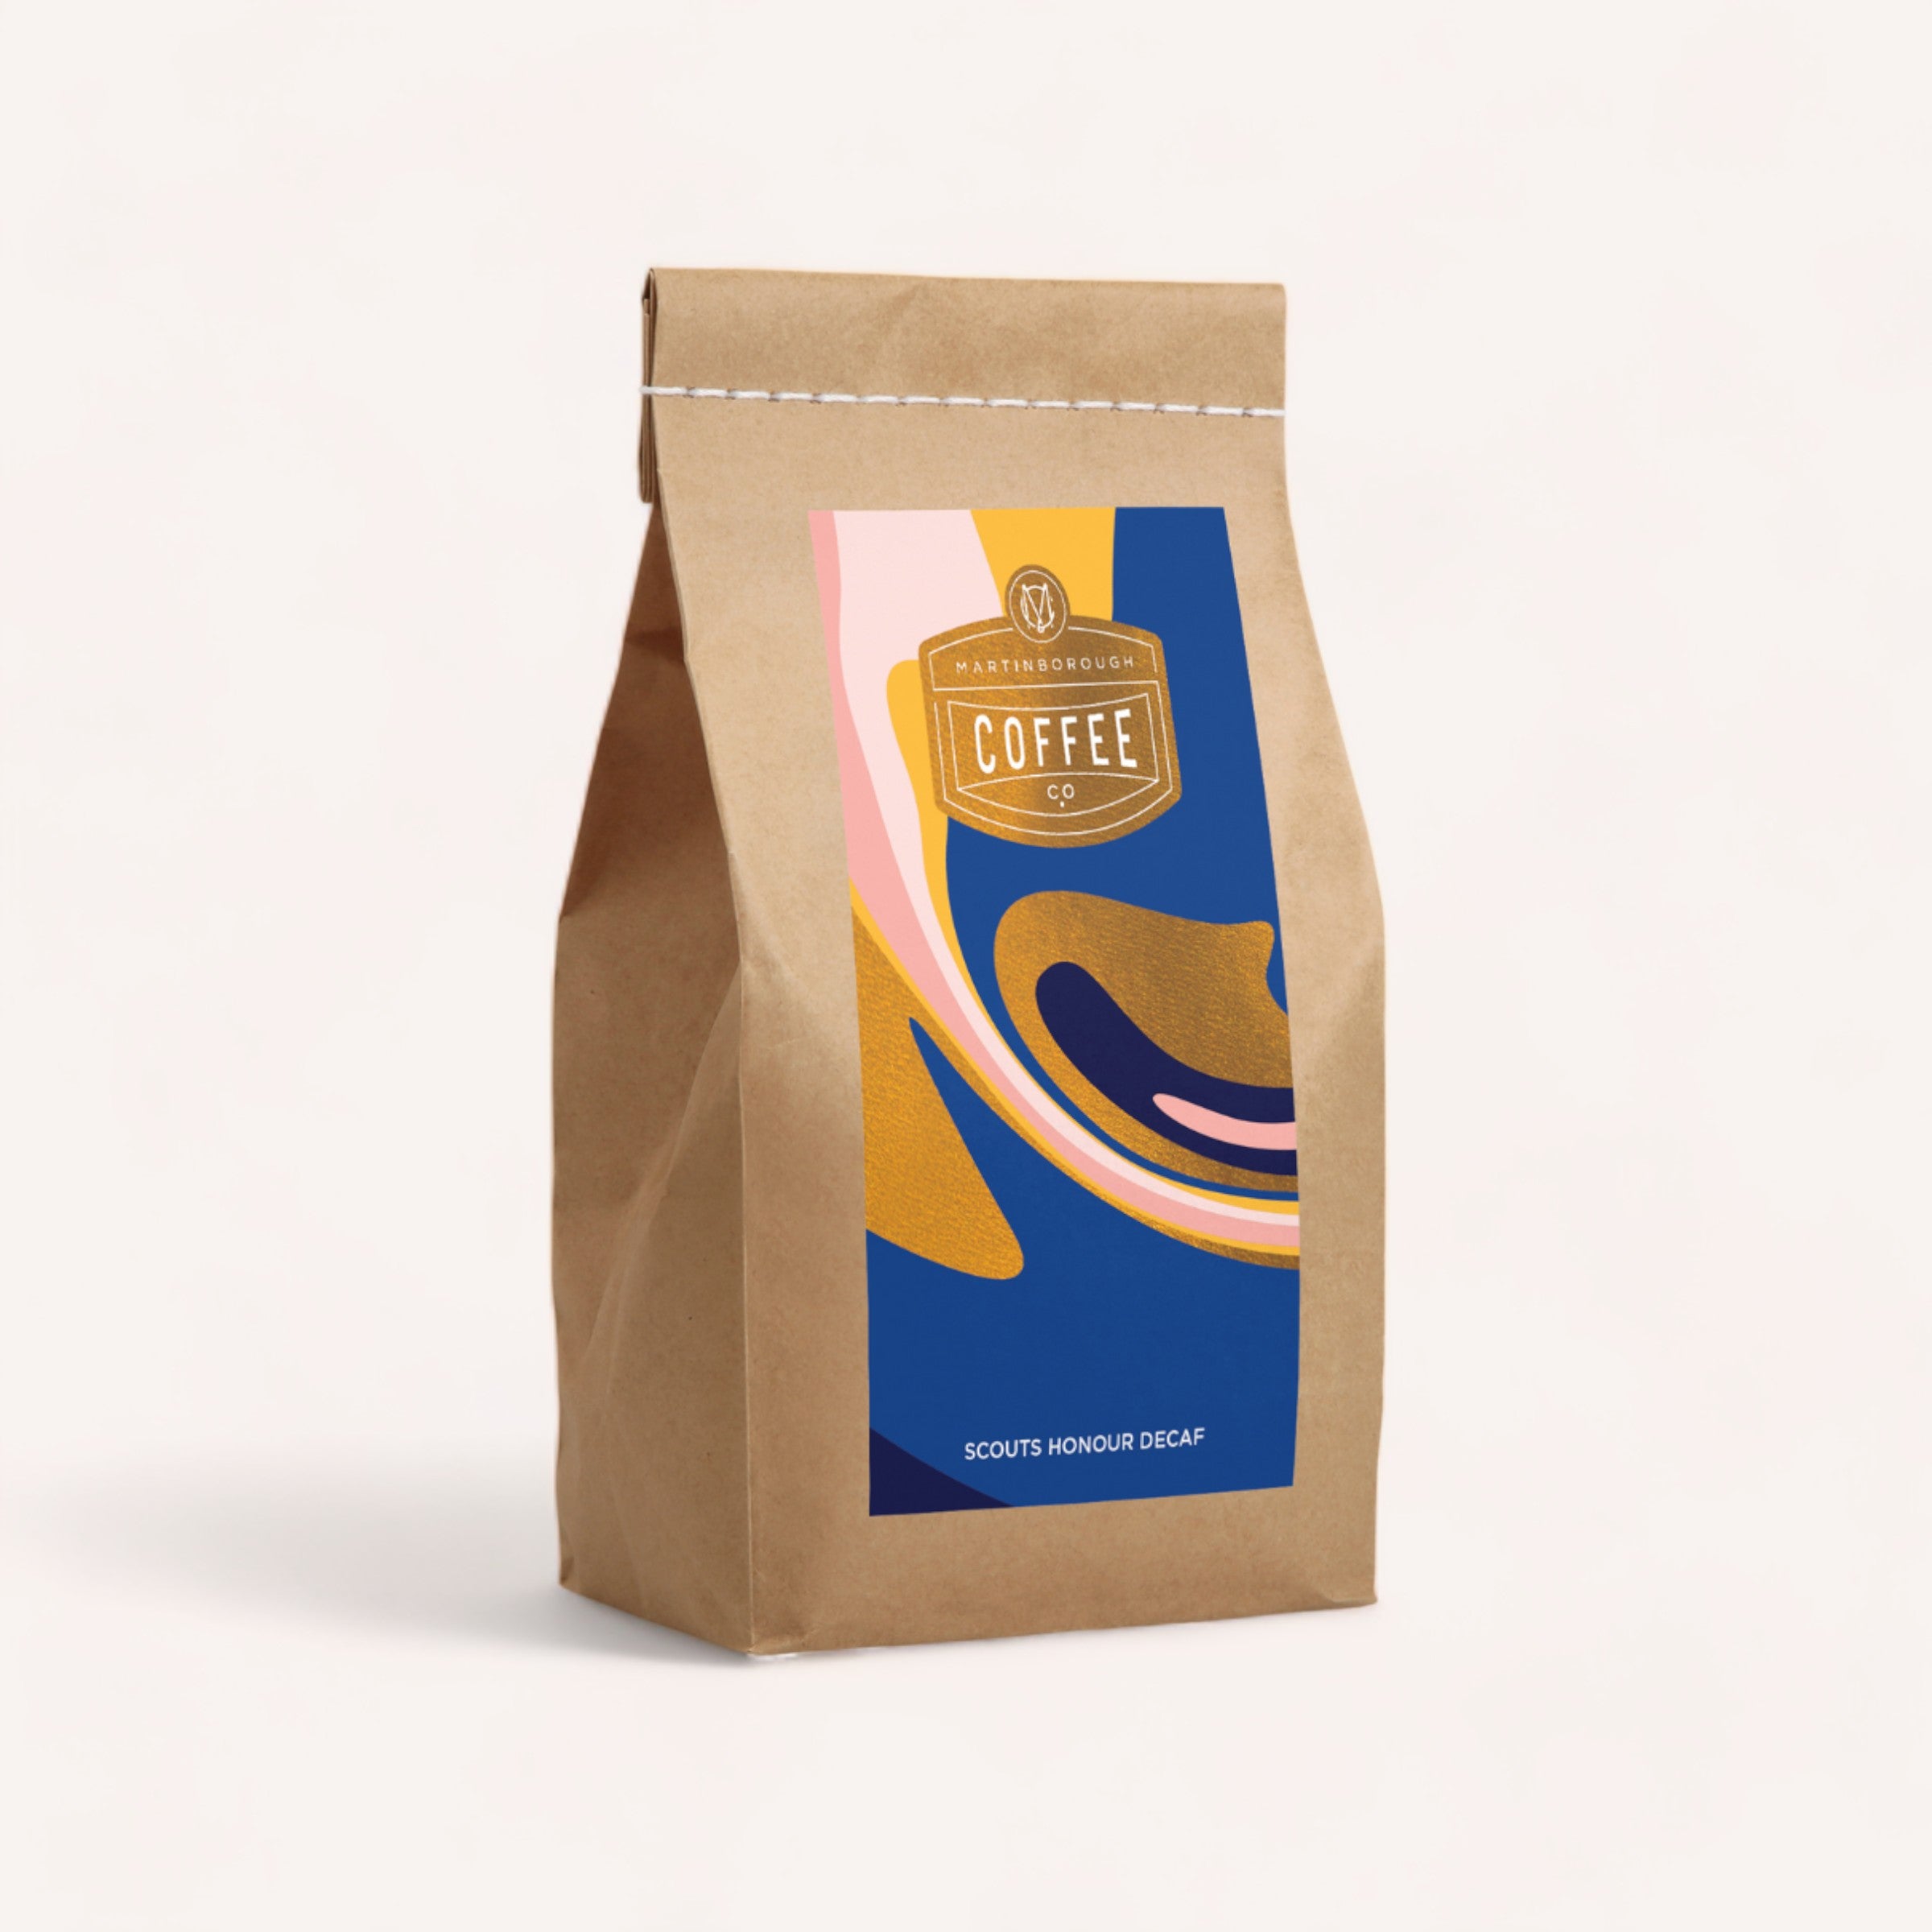 A sealed brown paper bag with a colorful label that reads "giftbox co. Coffee, Anyone? scout's honour decaf," presumably containing decaffeinated coffee beans or grounds.